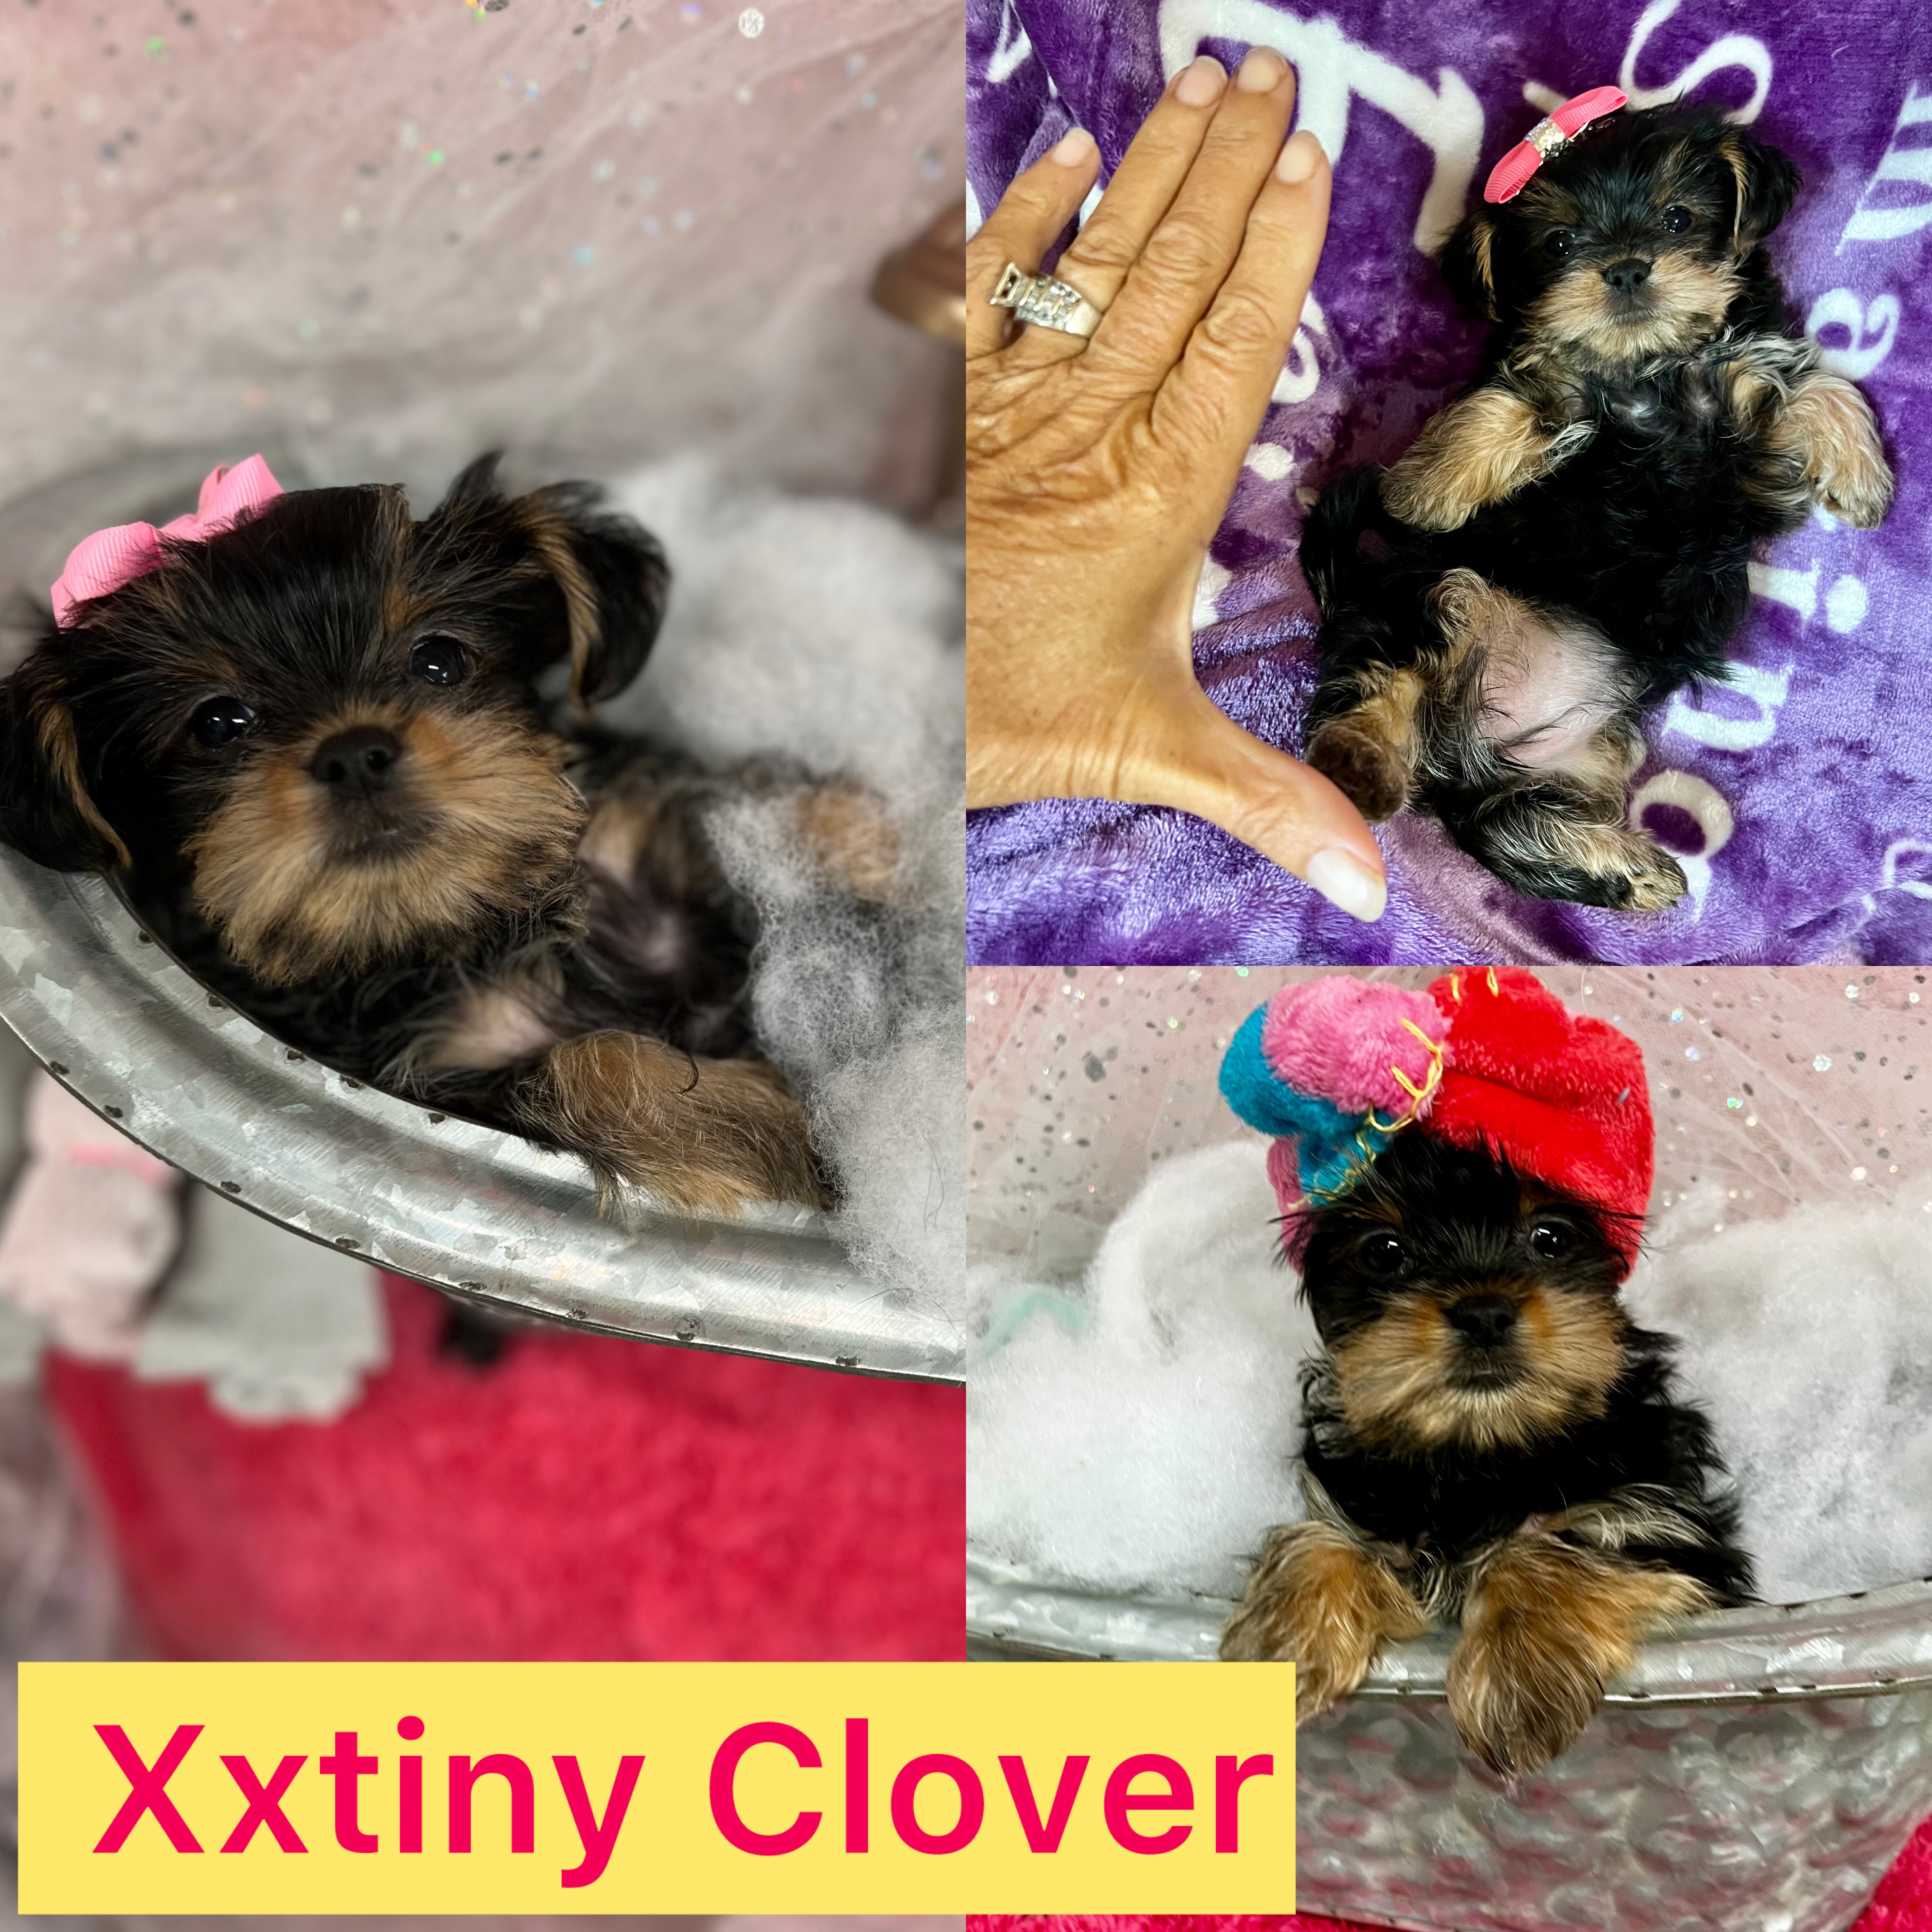 Clover is ADOPTED